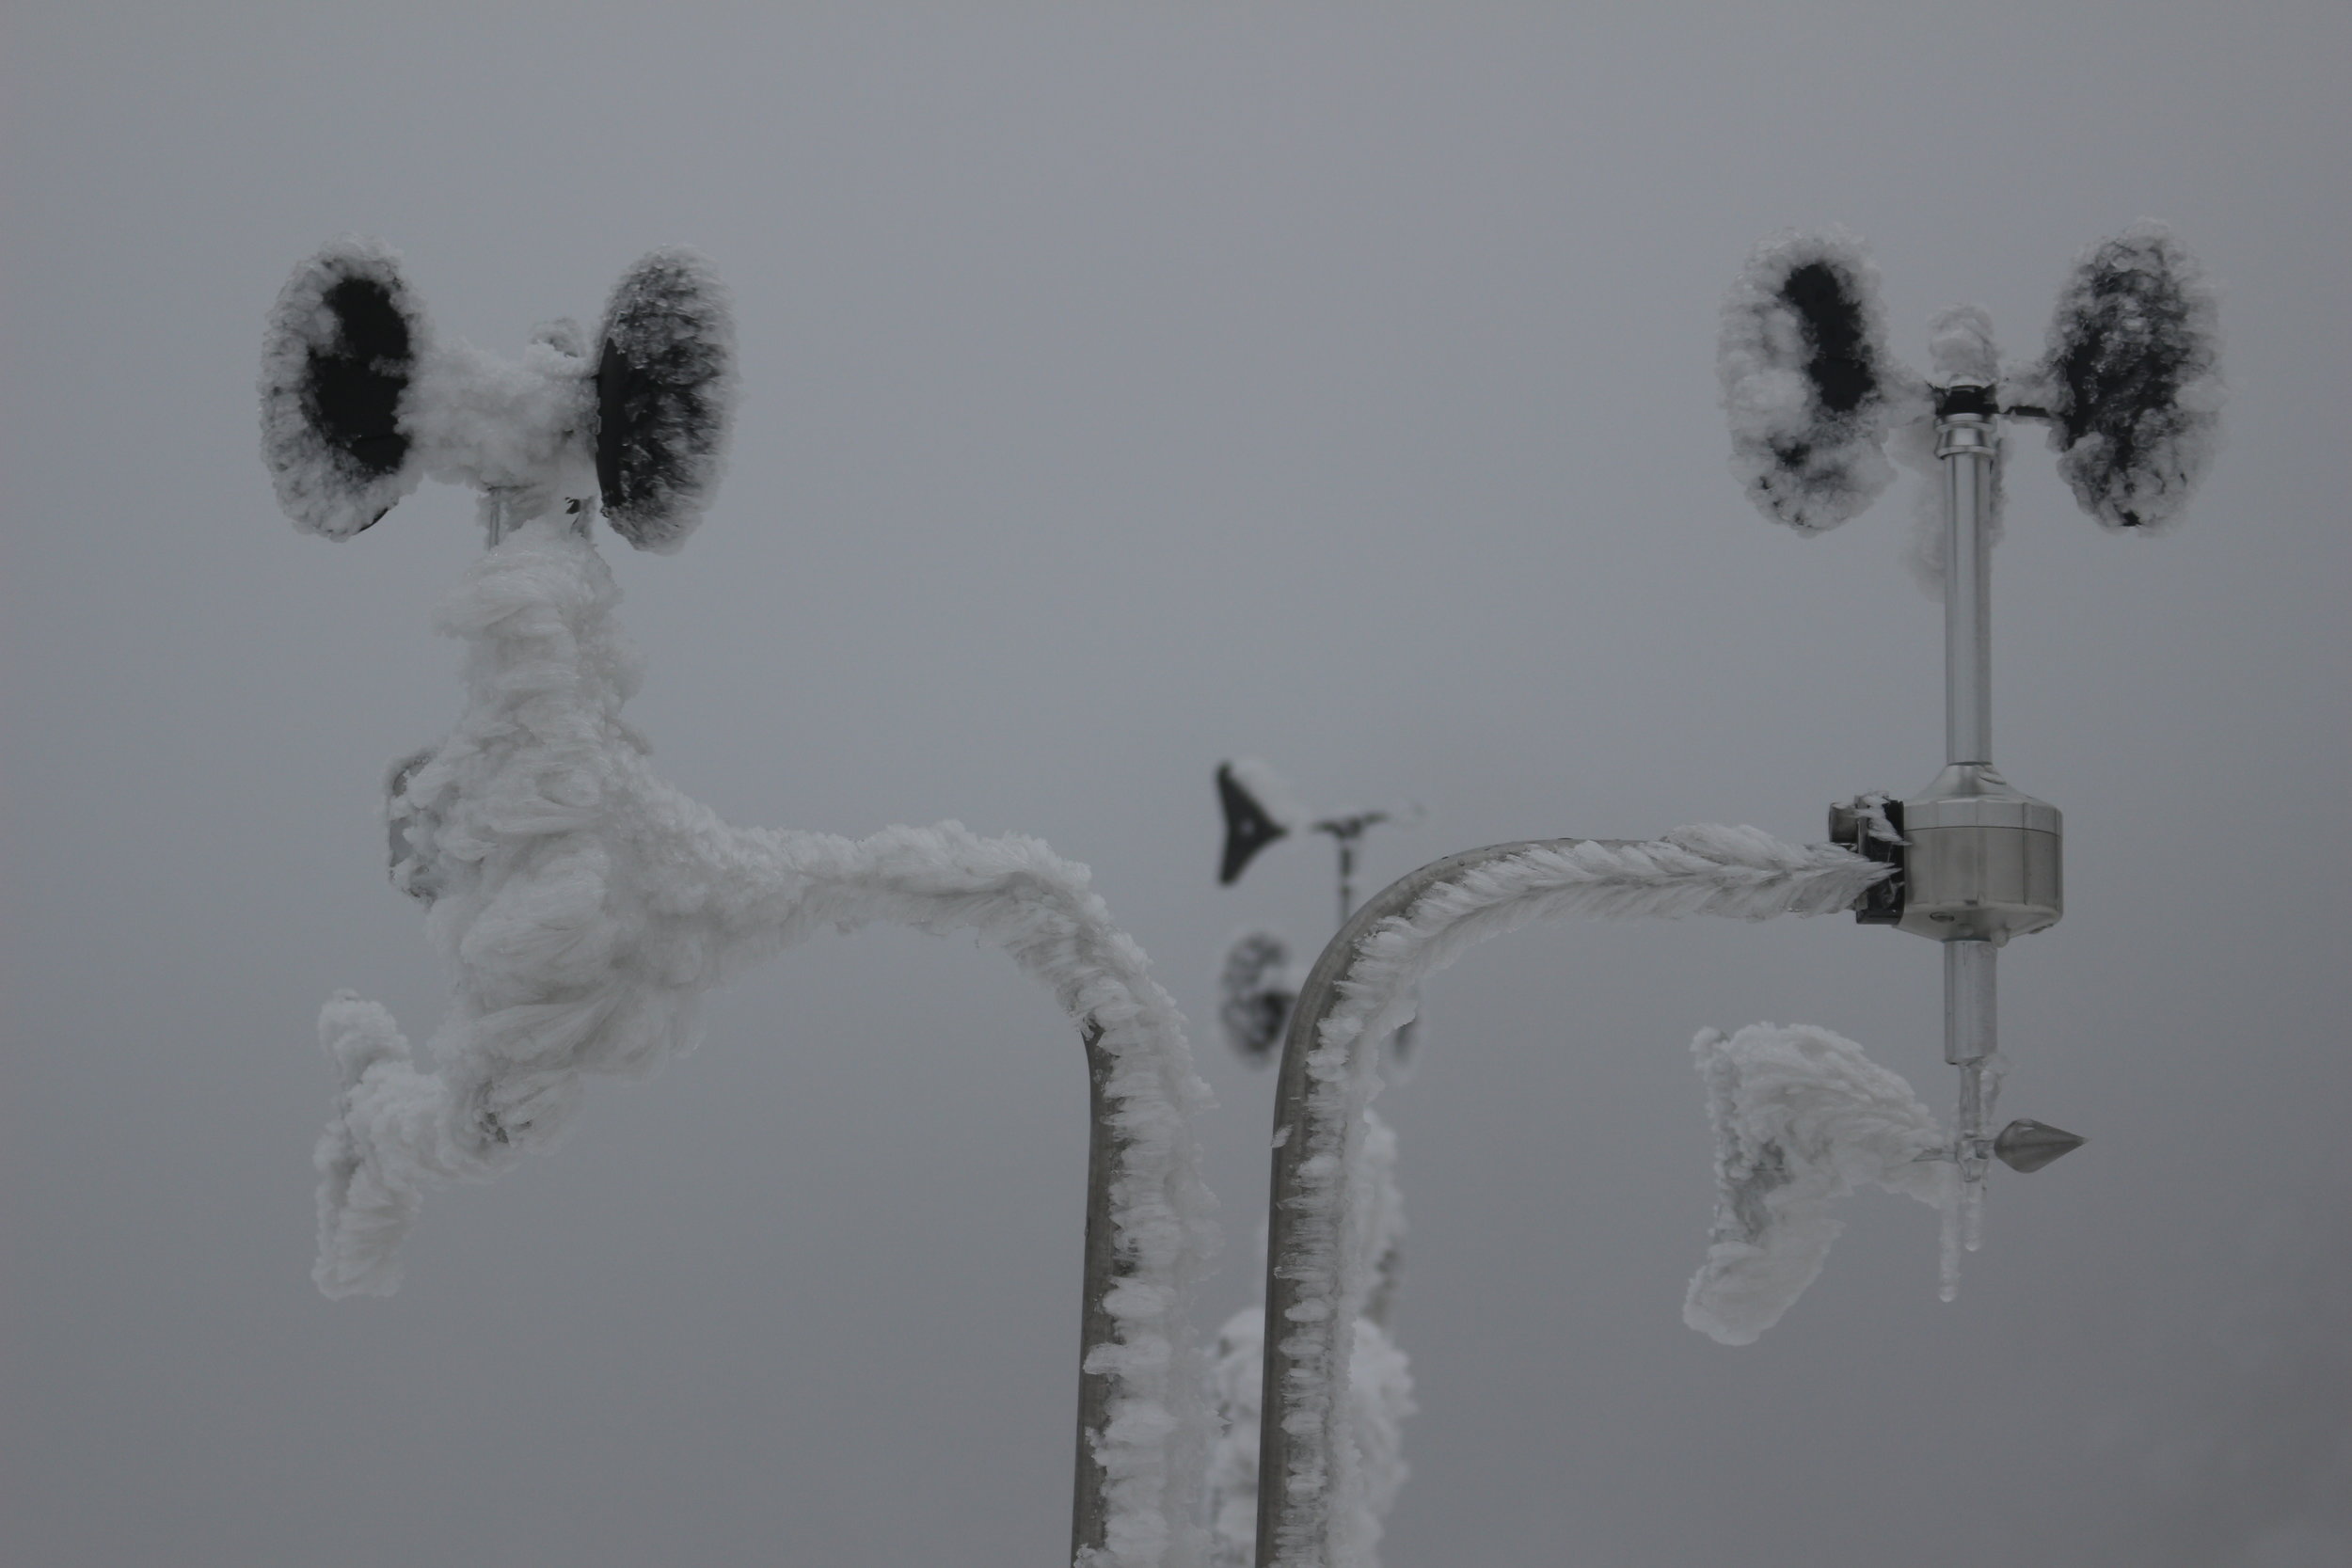 Heated and un-heated anemometer and wind vane comparison